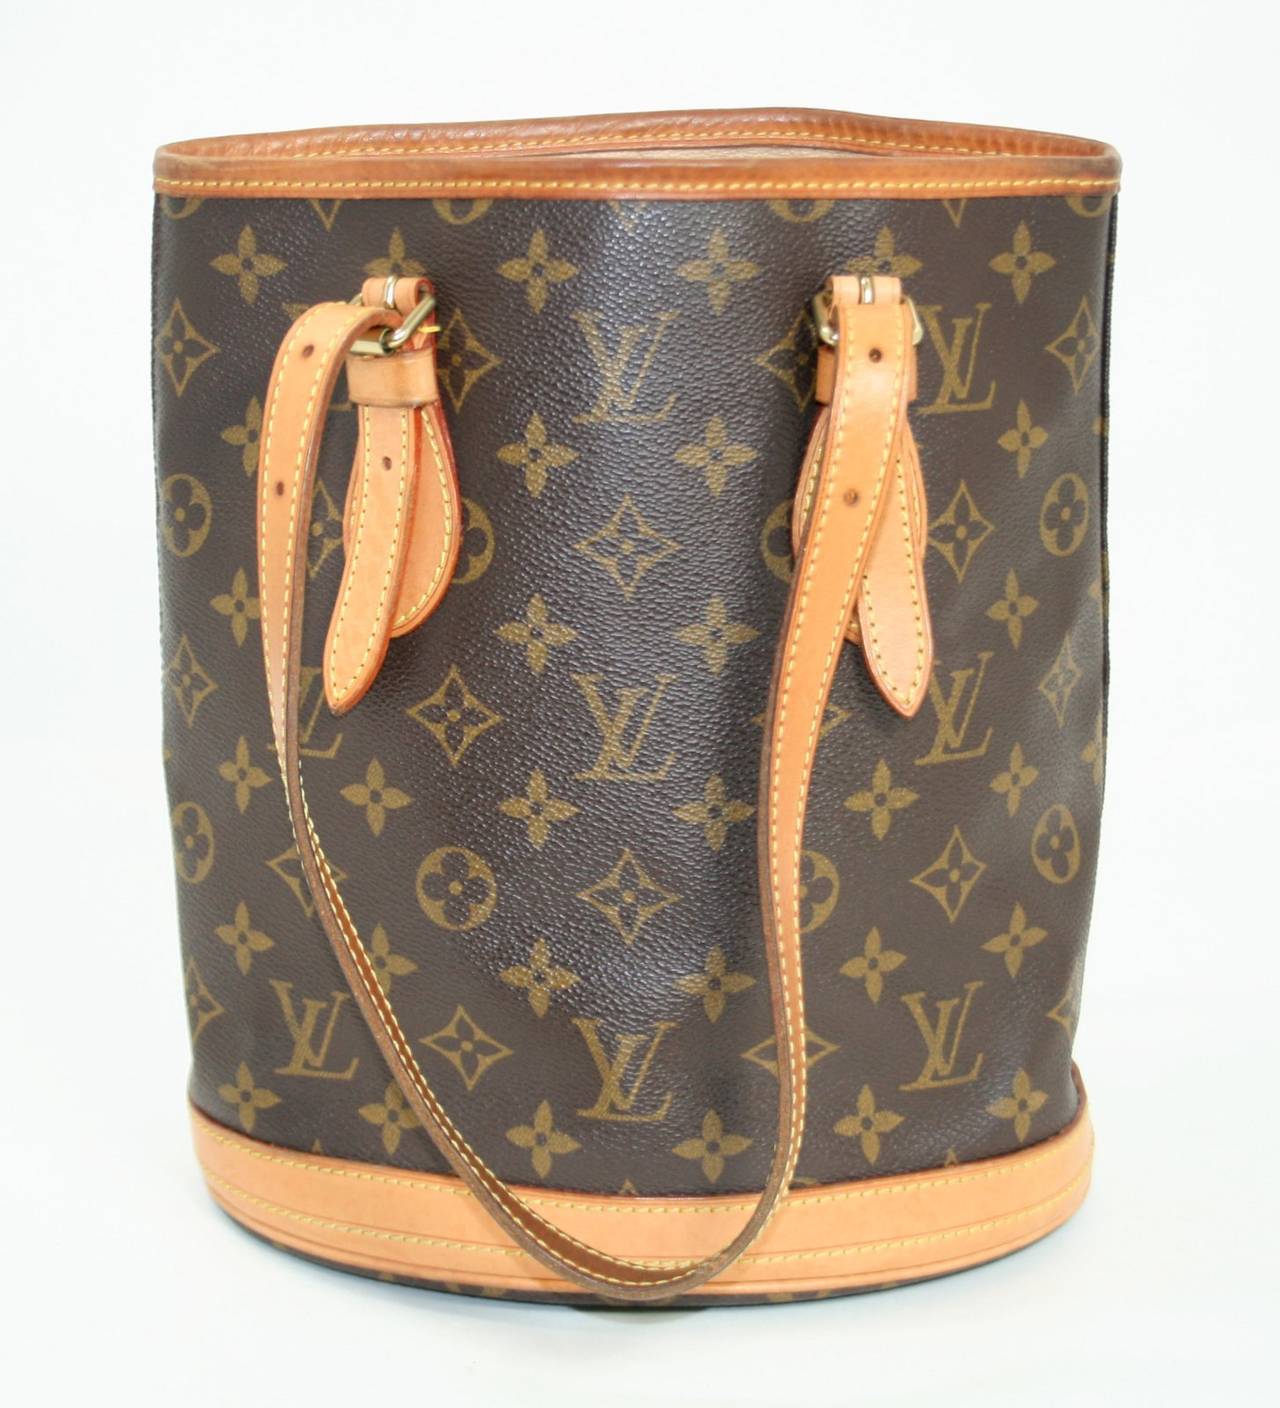 Louis Vuitton Petit Bucket Bag in Monogram Canvas In Good Condition In New York City & Hamptons, NY